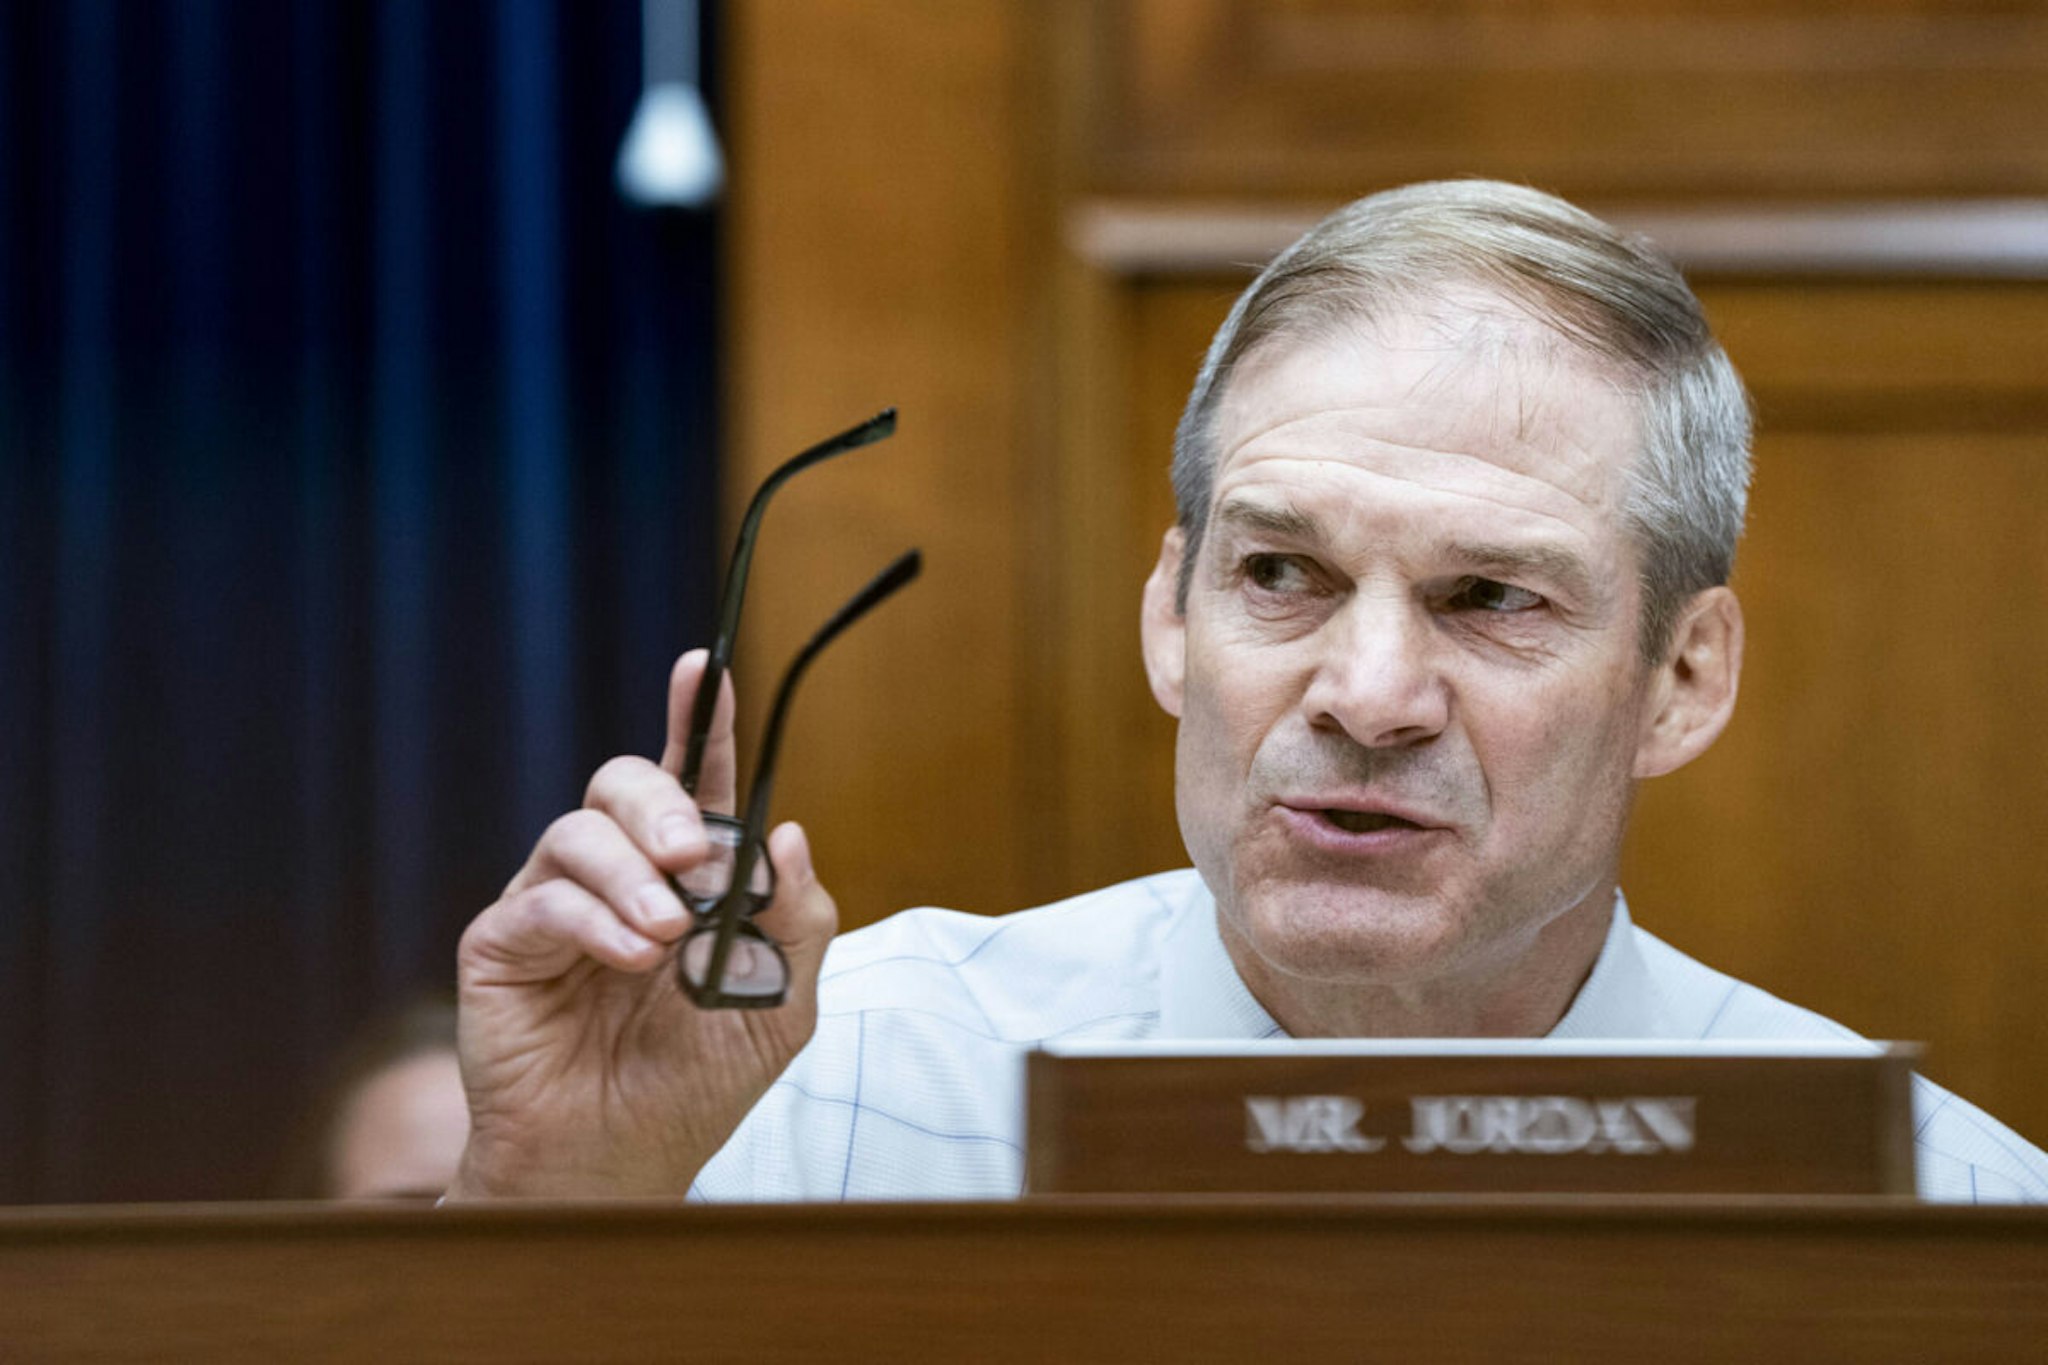 Representative Jim Jordan, a Republican from Ohio, during a hearing in Washington, DC, US, on Wednesday, July 19, 2023. An IRS supervisory agent has claimed to lawmakers the Justice Department mishandled the Hunter Biden investigation and that the US attorney for Delaware, David Weiss, was prevented from bringing charges wherever he wanted.